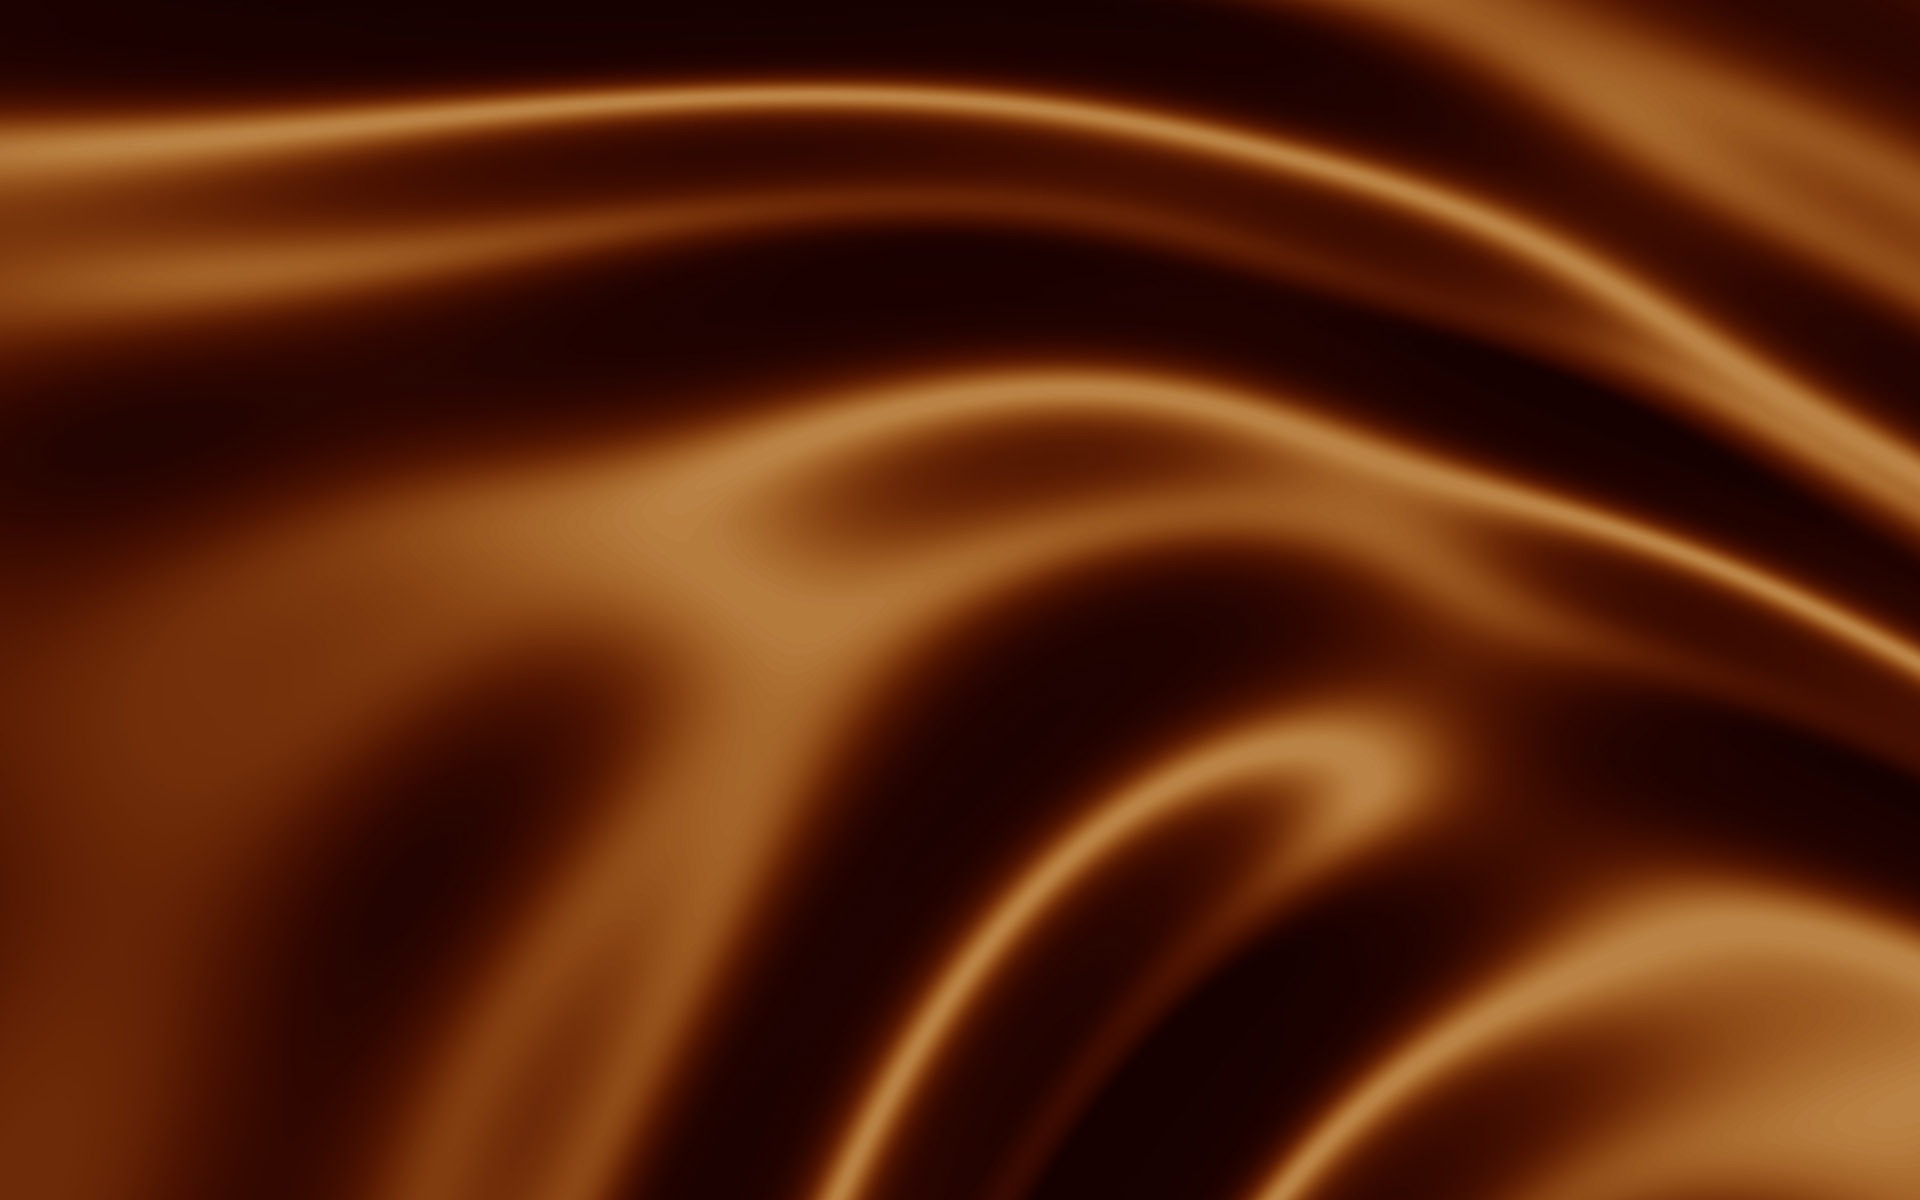  chocolate, texture, photo, background, download, hot chocolate texture, chocolate